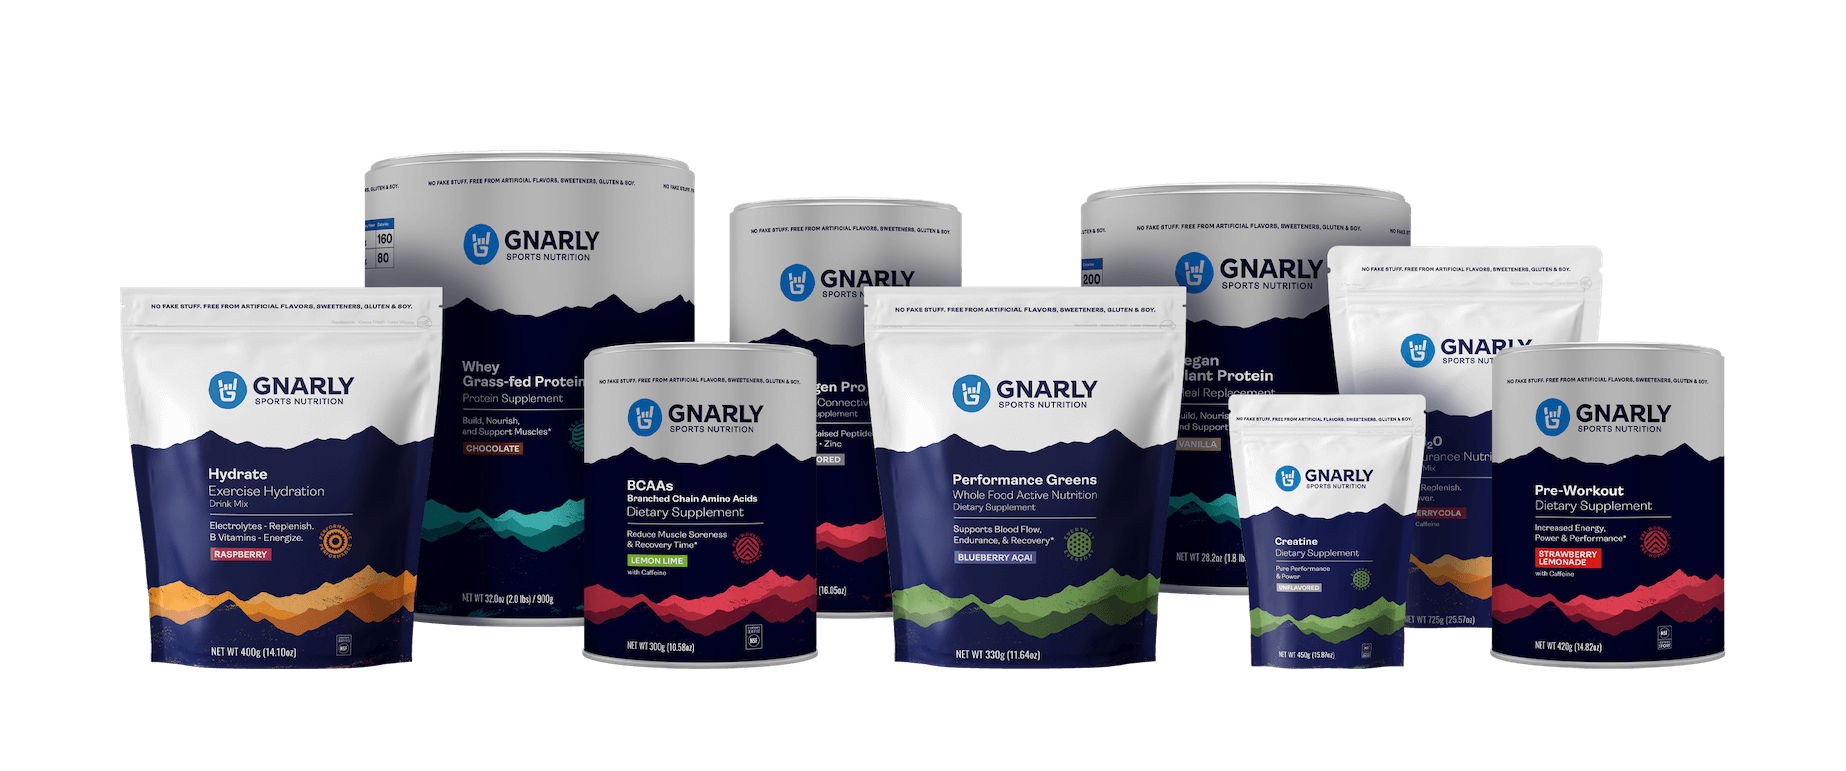 Gnarly Nutrition increased LTV by 2x for their subscribers